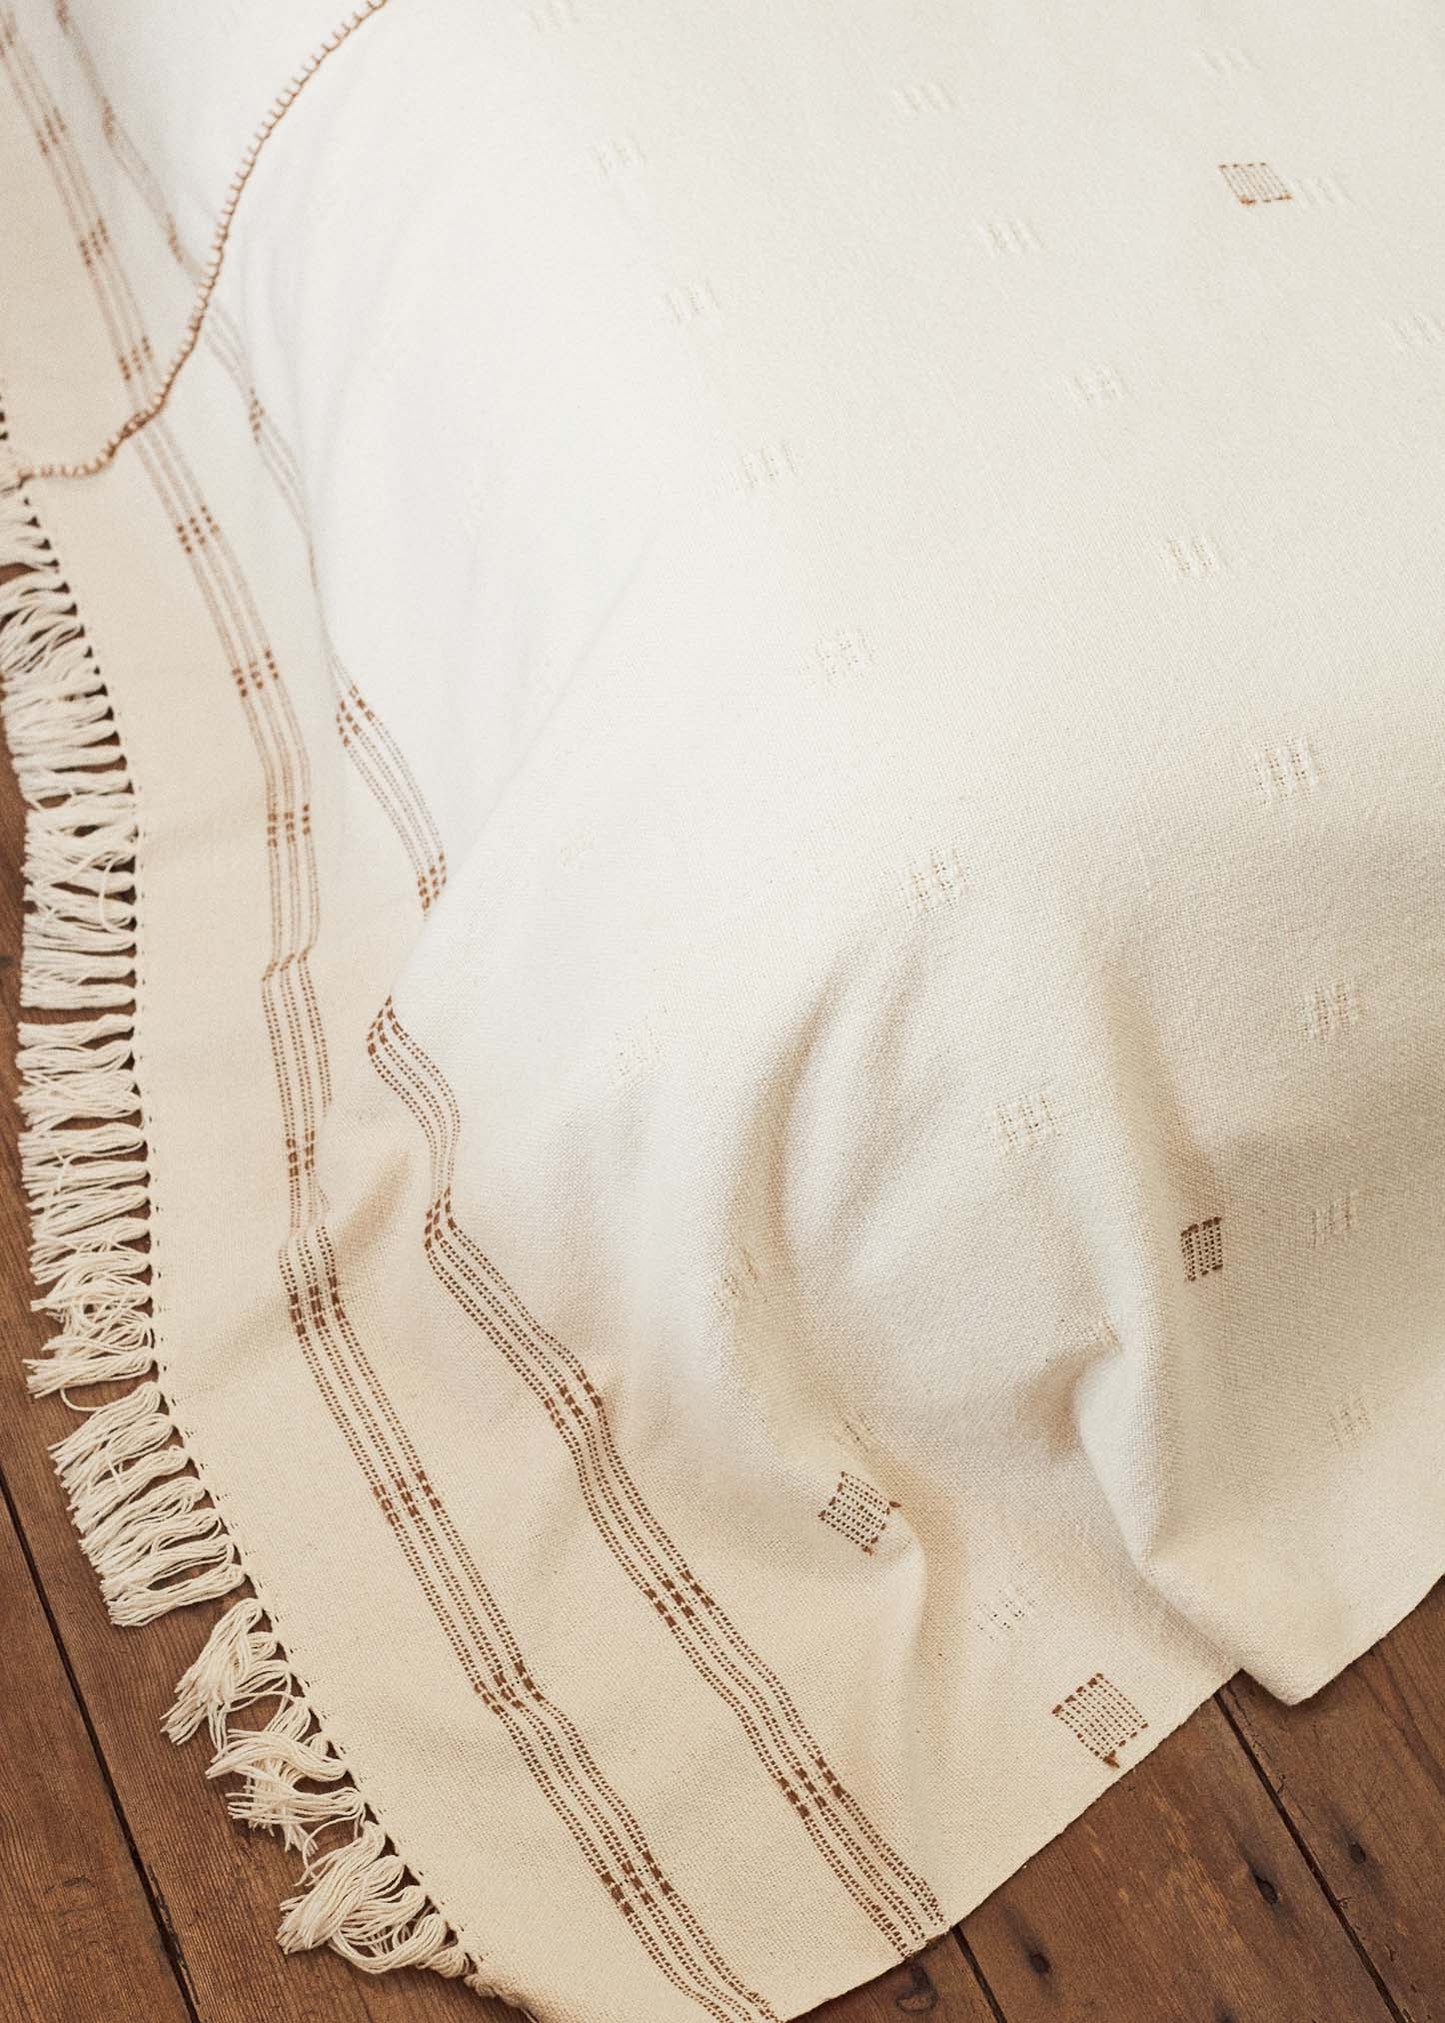 The Spine Blanket, our luxurious handwoven & hand stitched local, natural cotton blanket